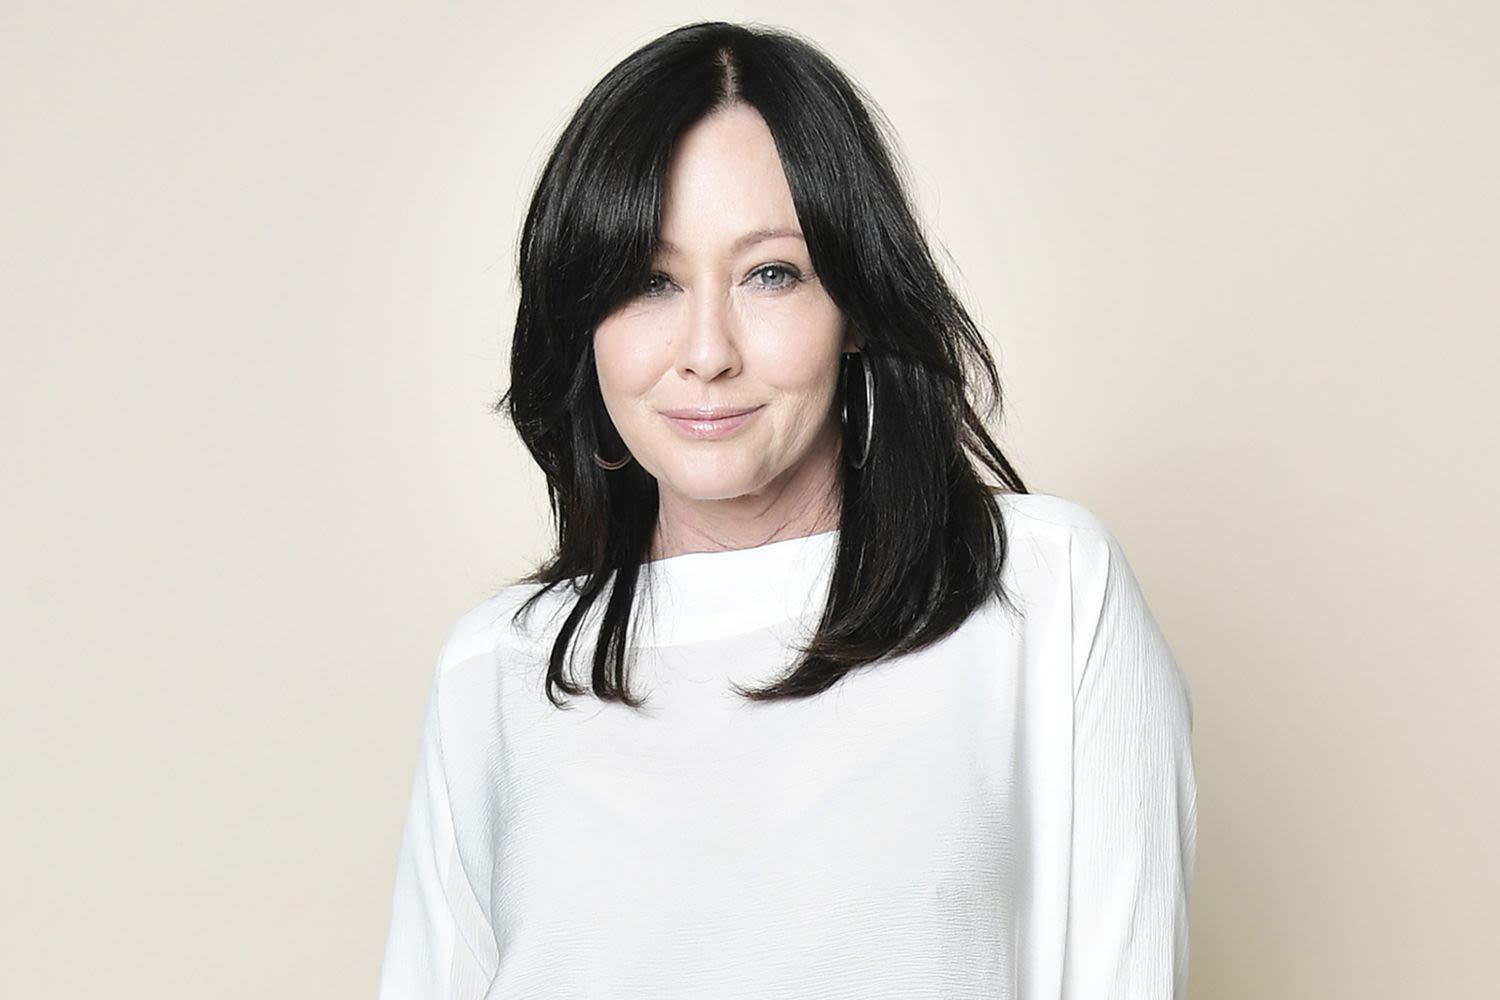 Shannen Doherty Doesn't 'Regret' Not Returning for “Charmed” Series Finale: I Was 'Incredibly Wrecked from Getting Fired'